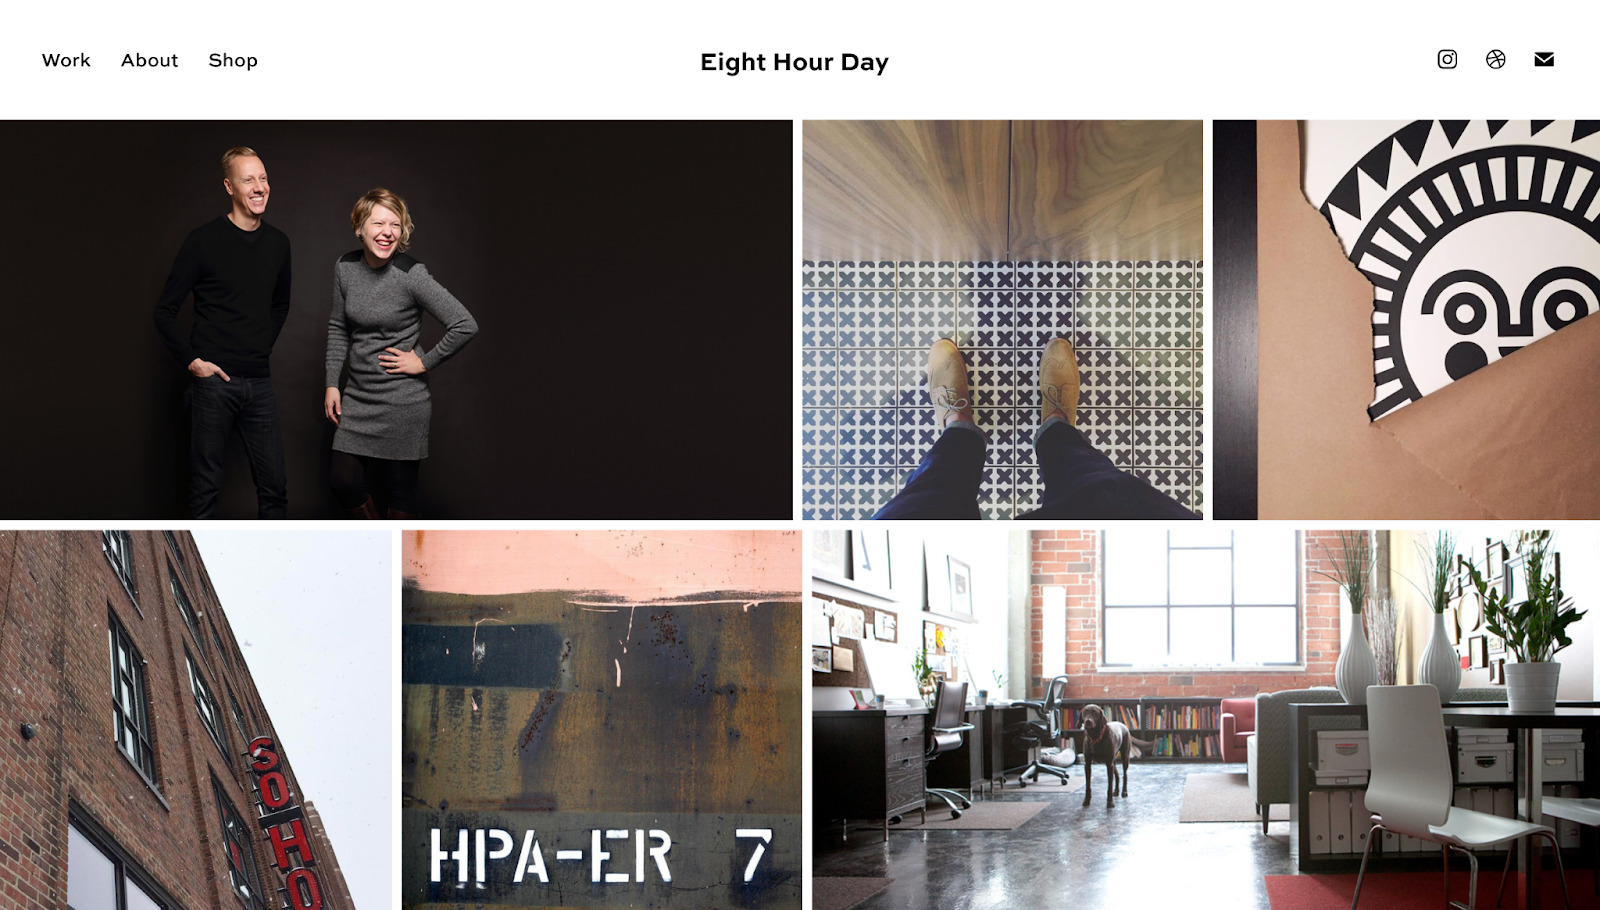 About Us Page Examples: Eight Hour Day